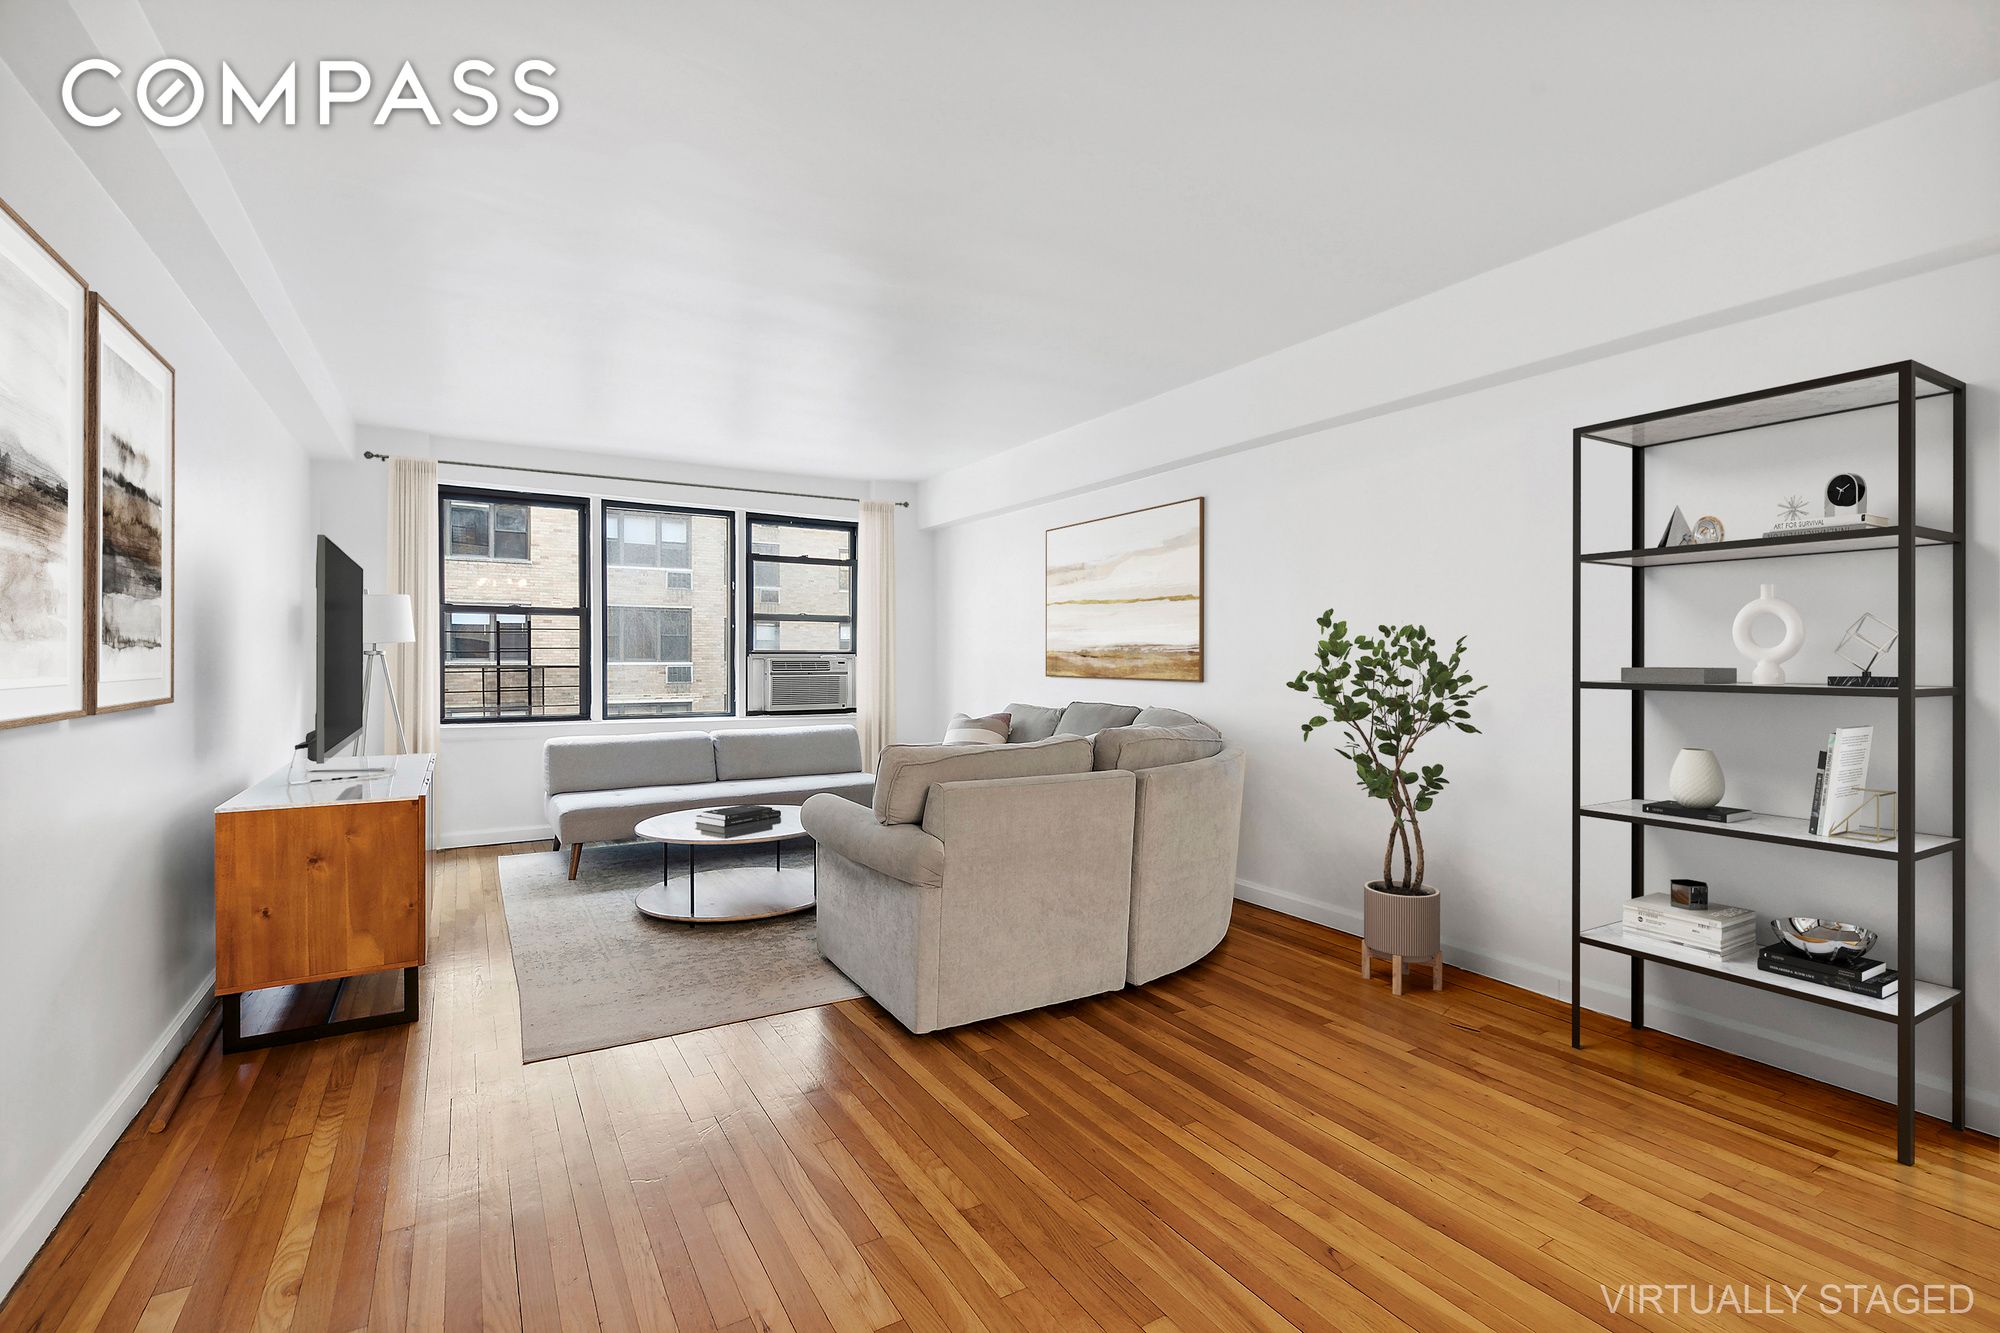 157 East 18th Street 4H, Gramercy Park, Downtown, NYC - 2 Bedrooms  
2 Bathrooms  
4 Rooms - 